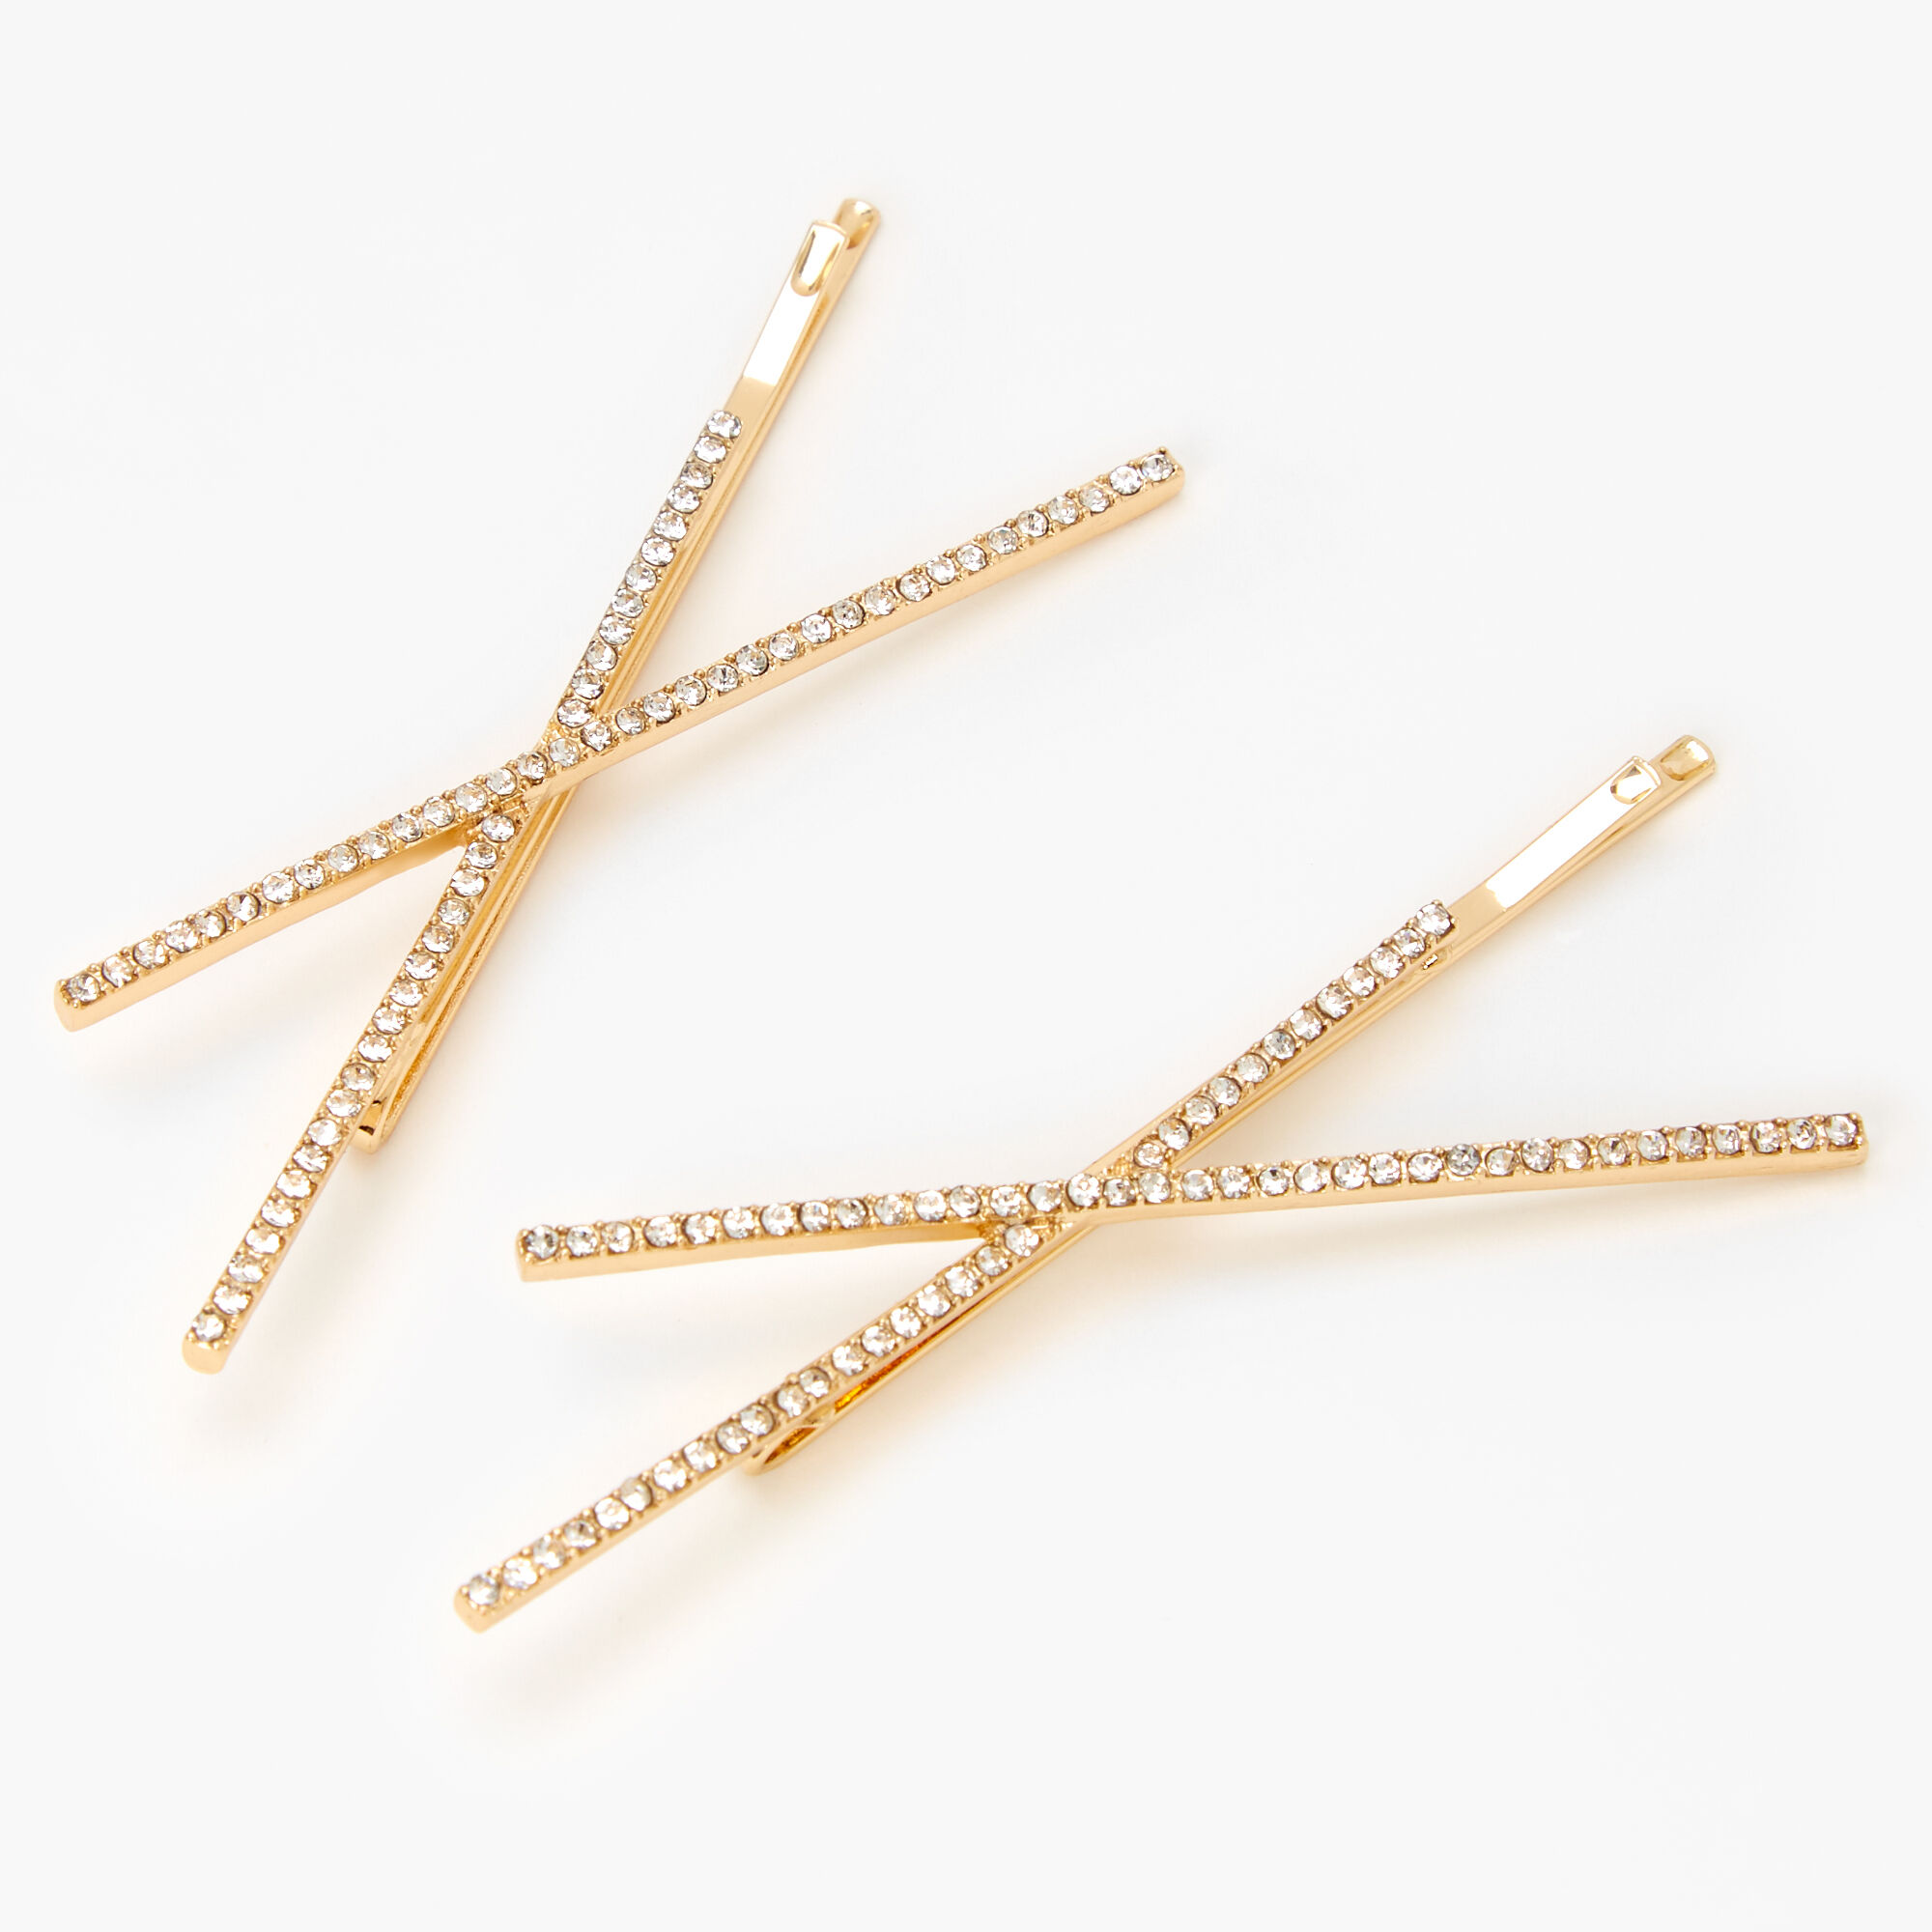 View Claires Tone Rhinestone Criss Cross Hair Pins 2 Pack Gold information